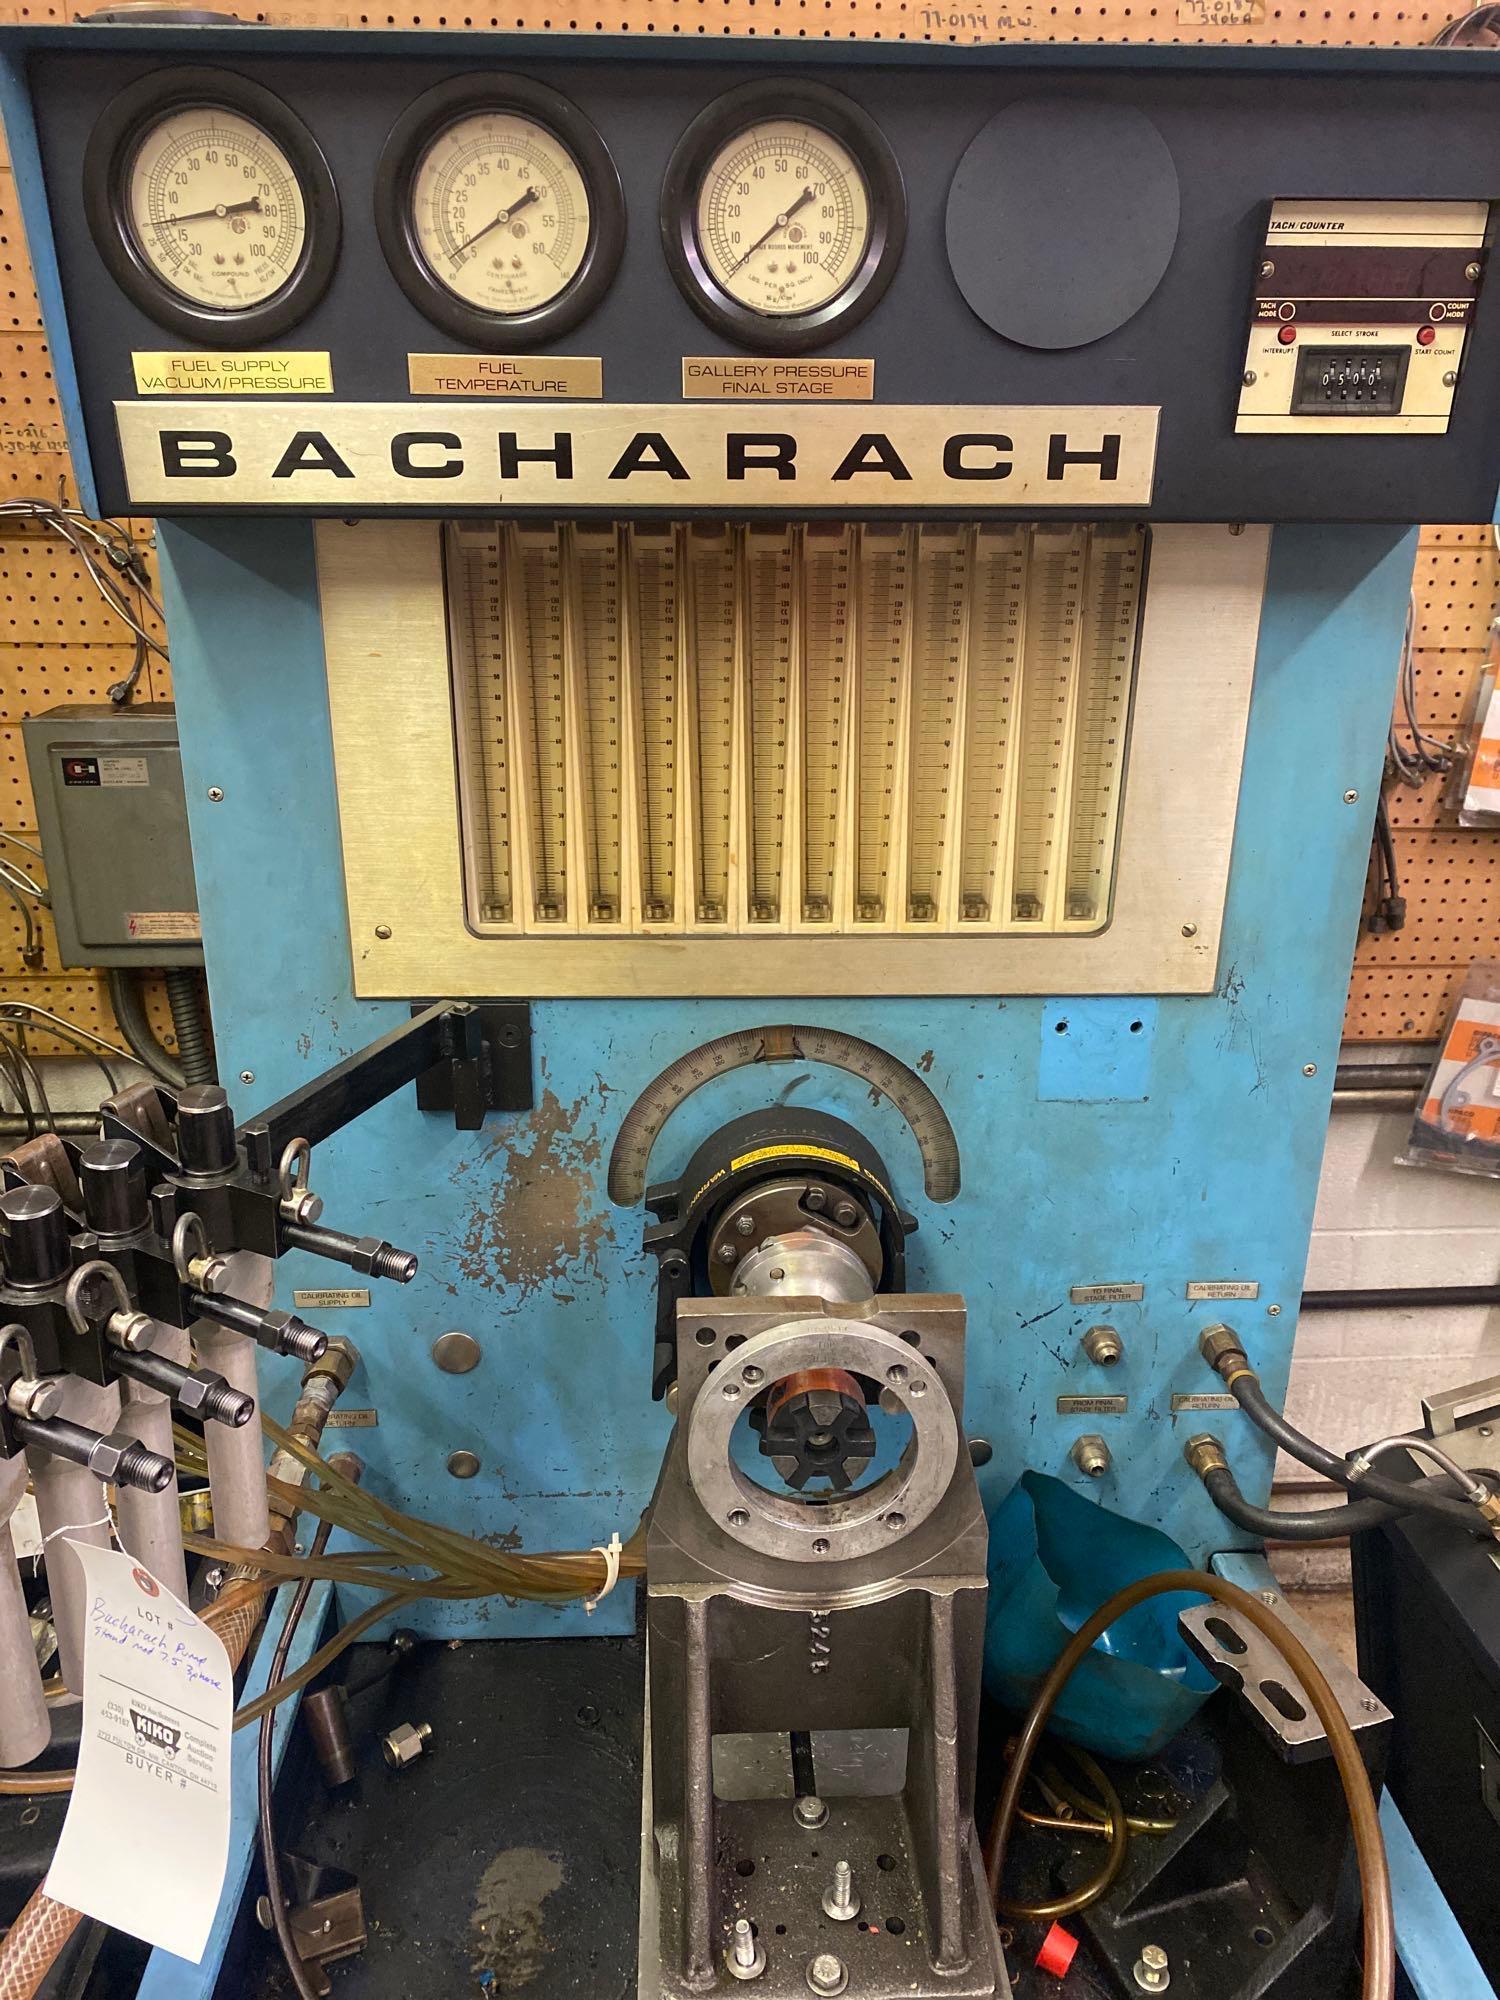 Bacharach Specialist Series model 7.5 Pump Stand